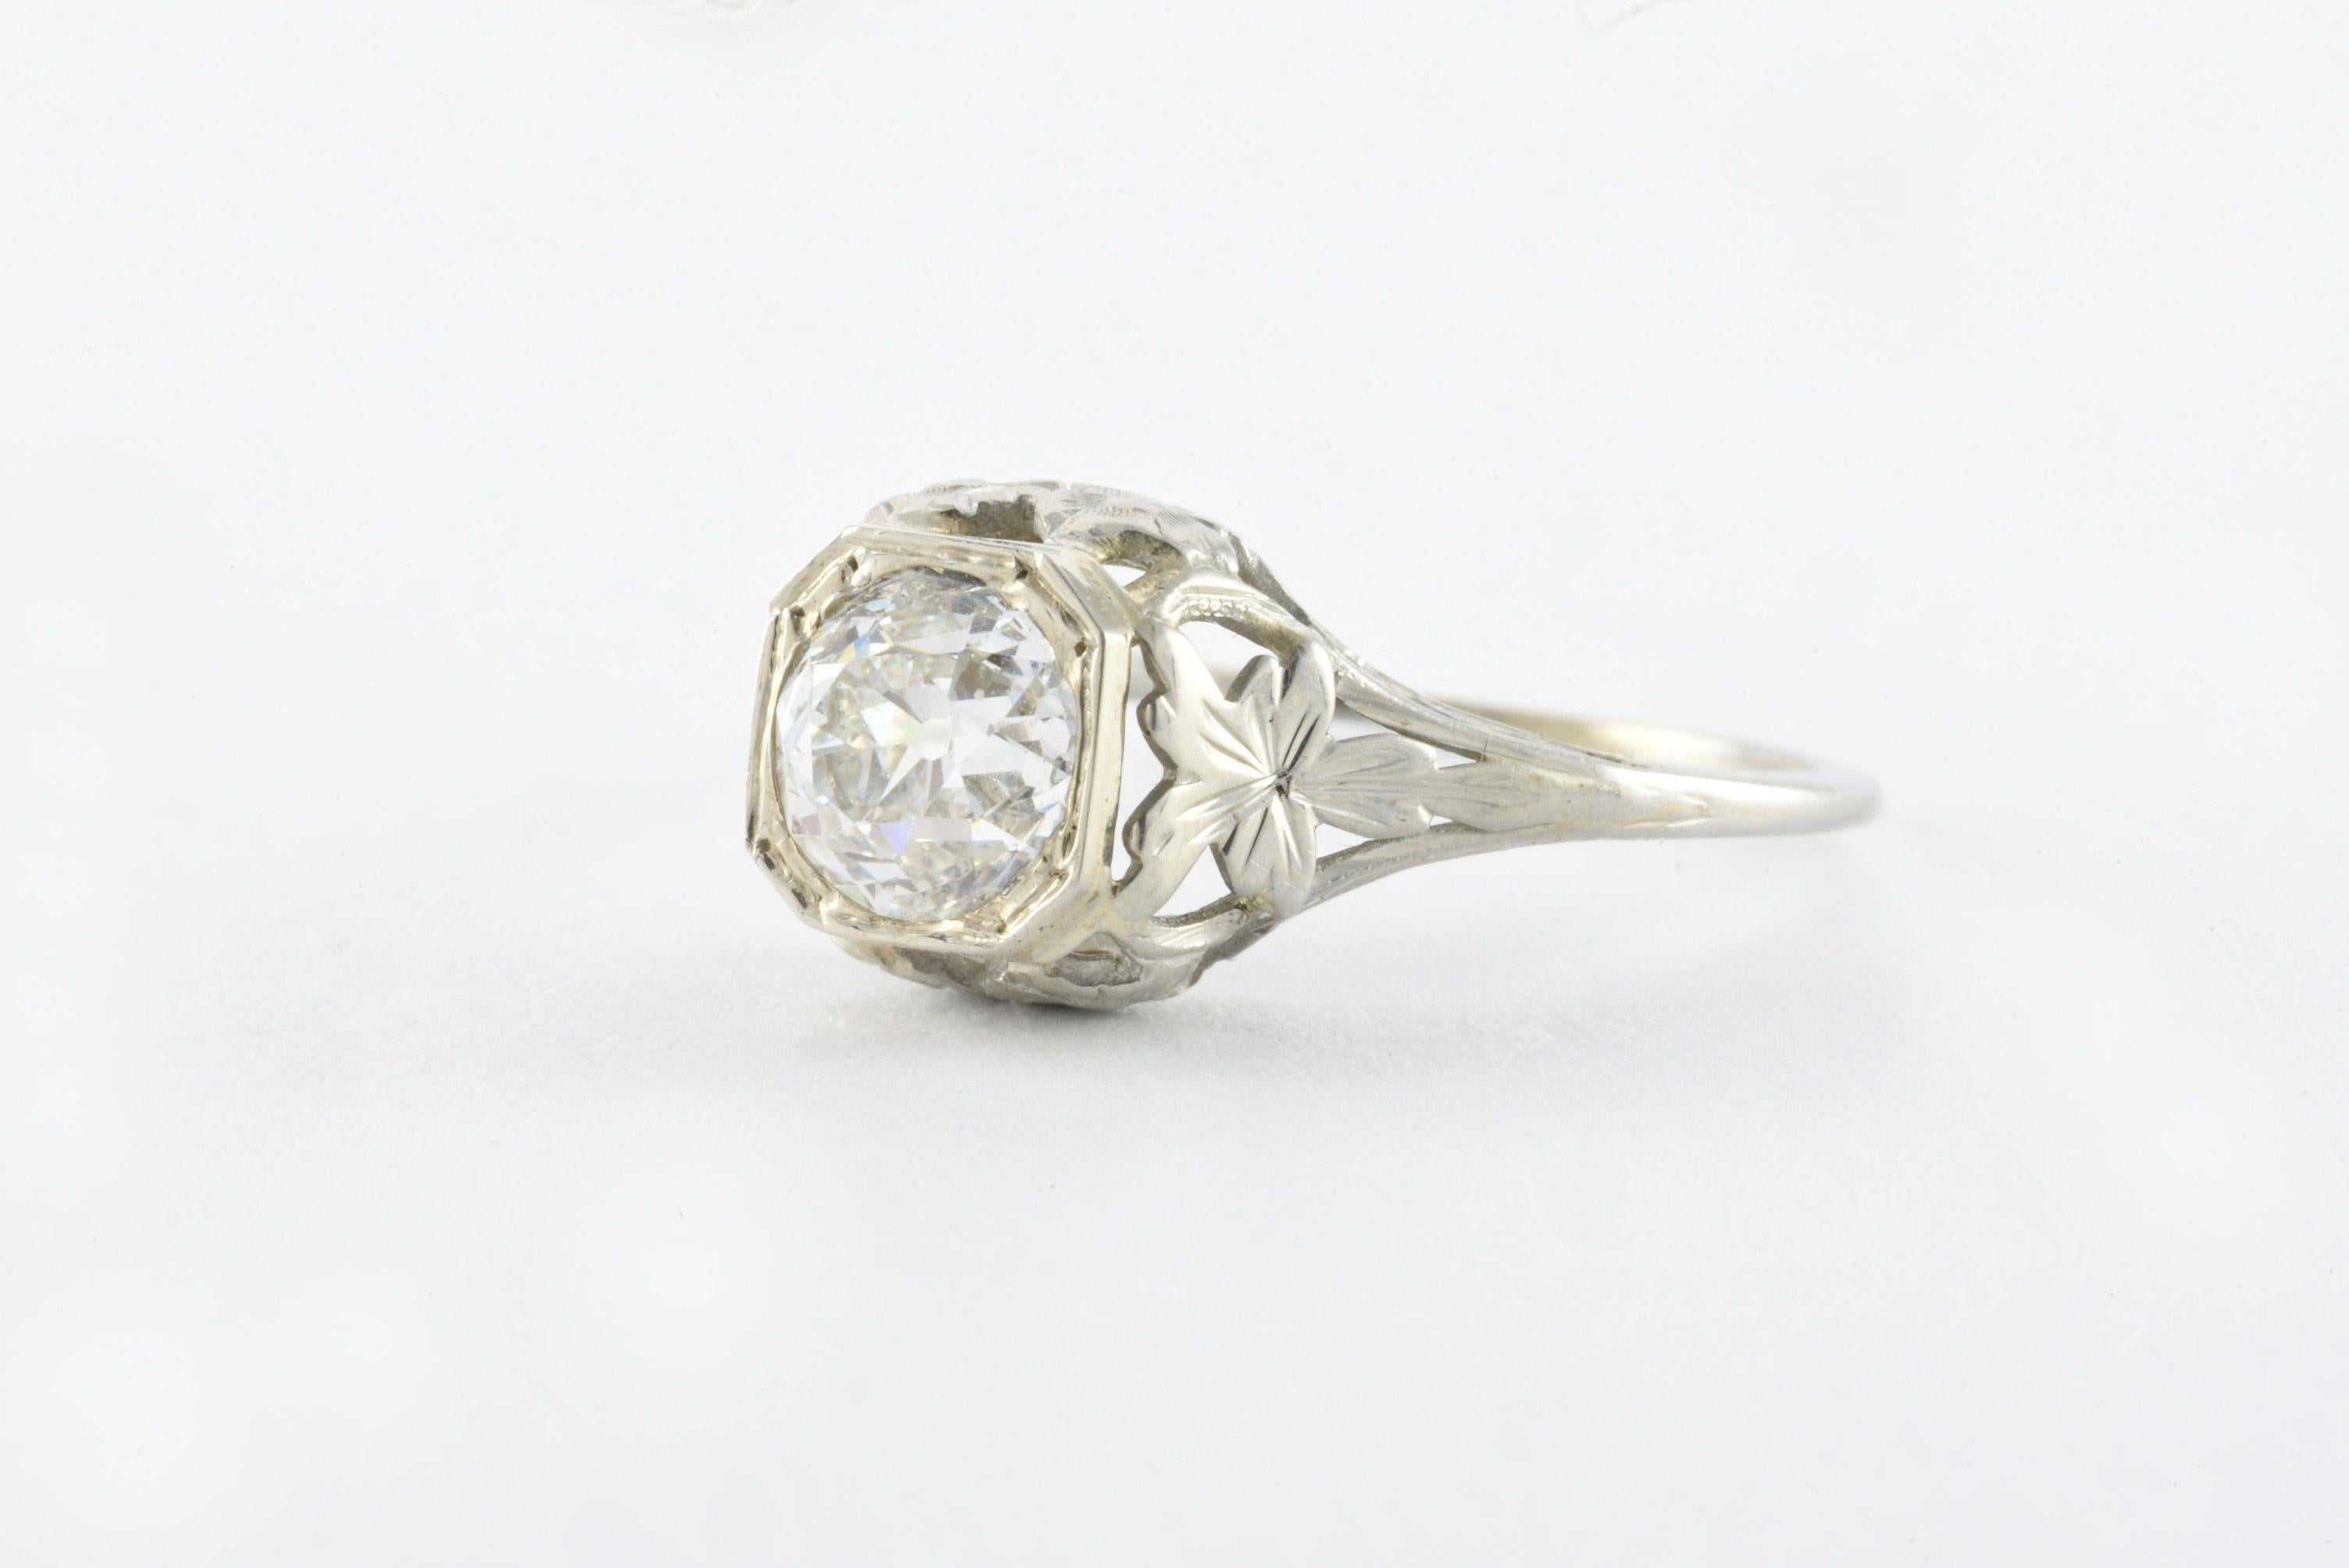 A bold Old European cut diamond measuring approximately 0.98 carats, 5.86 x 5.95 x 4.15mm, H color, VS2-SI1 clarity sits atop a delicate, intricate filigree band fashioned in 18kt white gold. 
